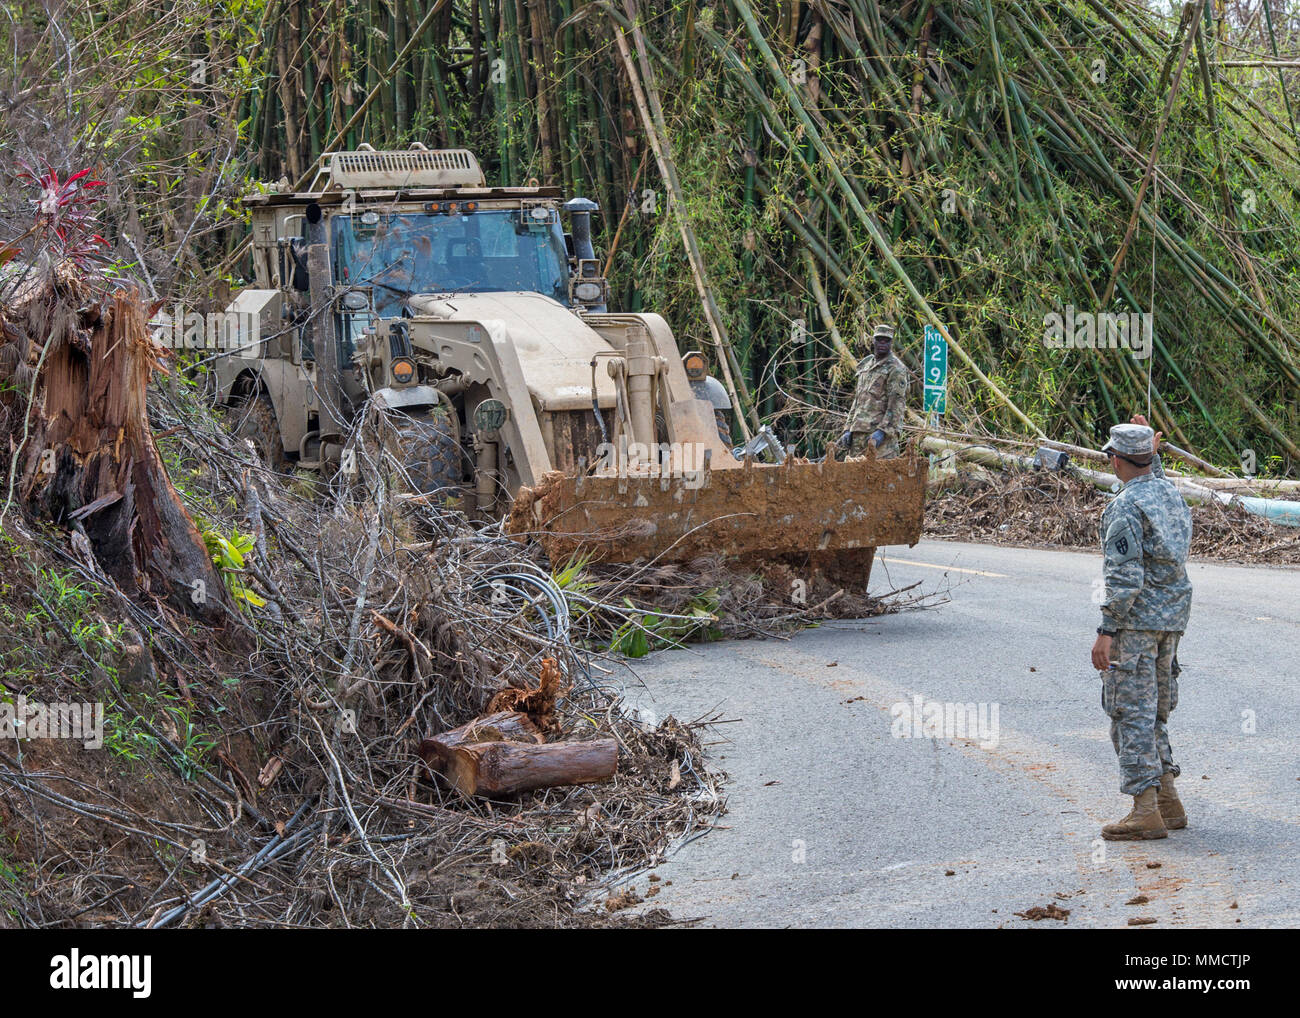 Soldiers from the Puerto Rico Army National Guard and the South Carolina Army National Guard team up to clear debris that blocks roads in the aftermath of Hurricane Maria.  The Soldiers were working in the vicinity of Cayey, Puerto Rico.  (36th Infantry Division photo by Staff Sgt. Mark Scovell) Stock Photo